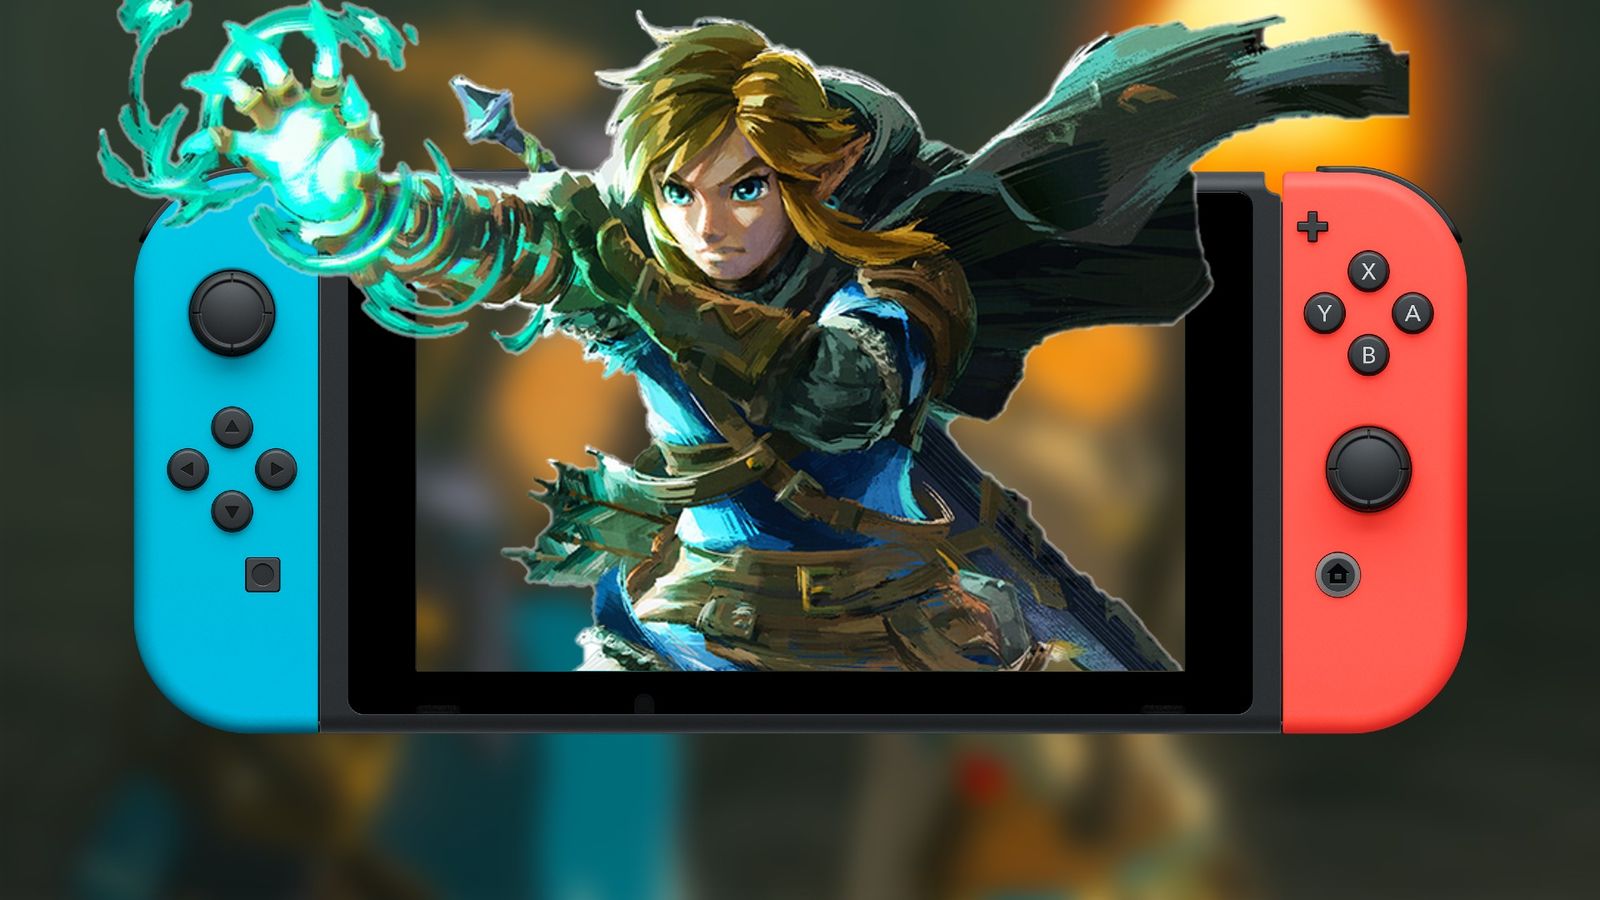 Nintendo Switch with Link using his glove from Tears of the Kingdom popping out